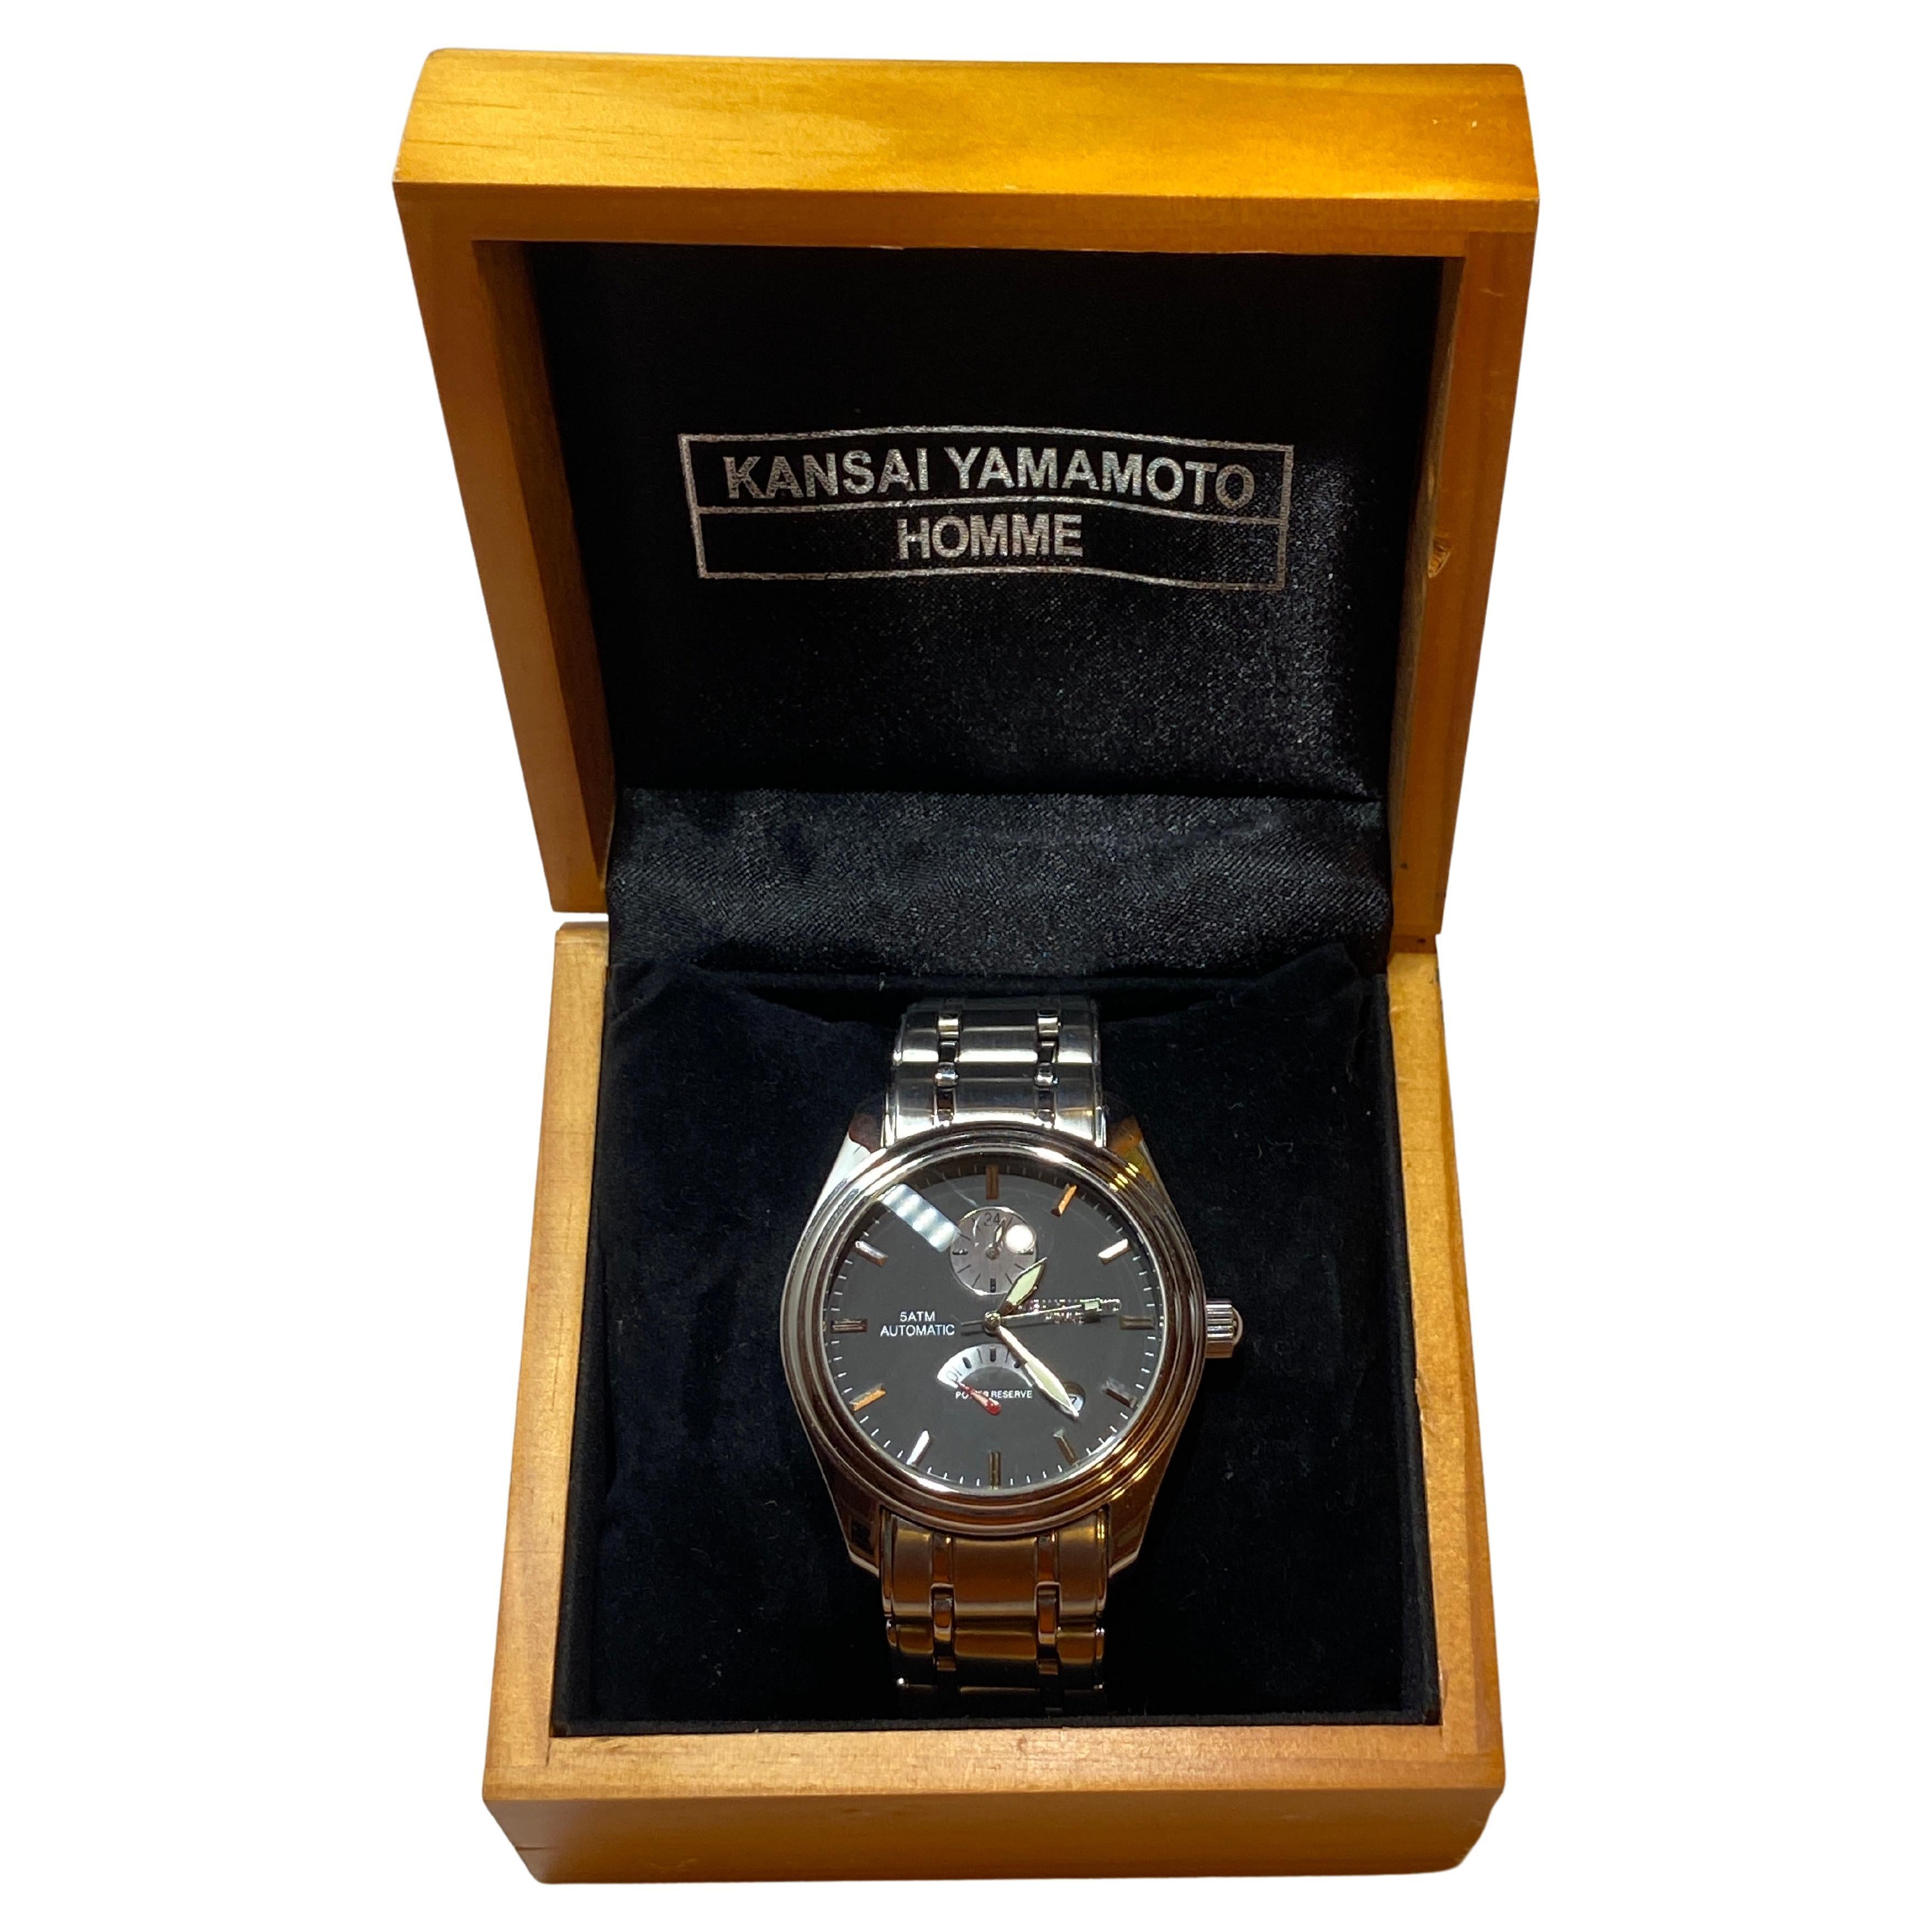 Kansai Yamamoto 5 ATM Automatic, Water Resistant, 22 Jewels, Skeleton-Back Watch For Sale